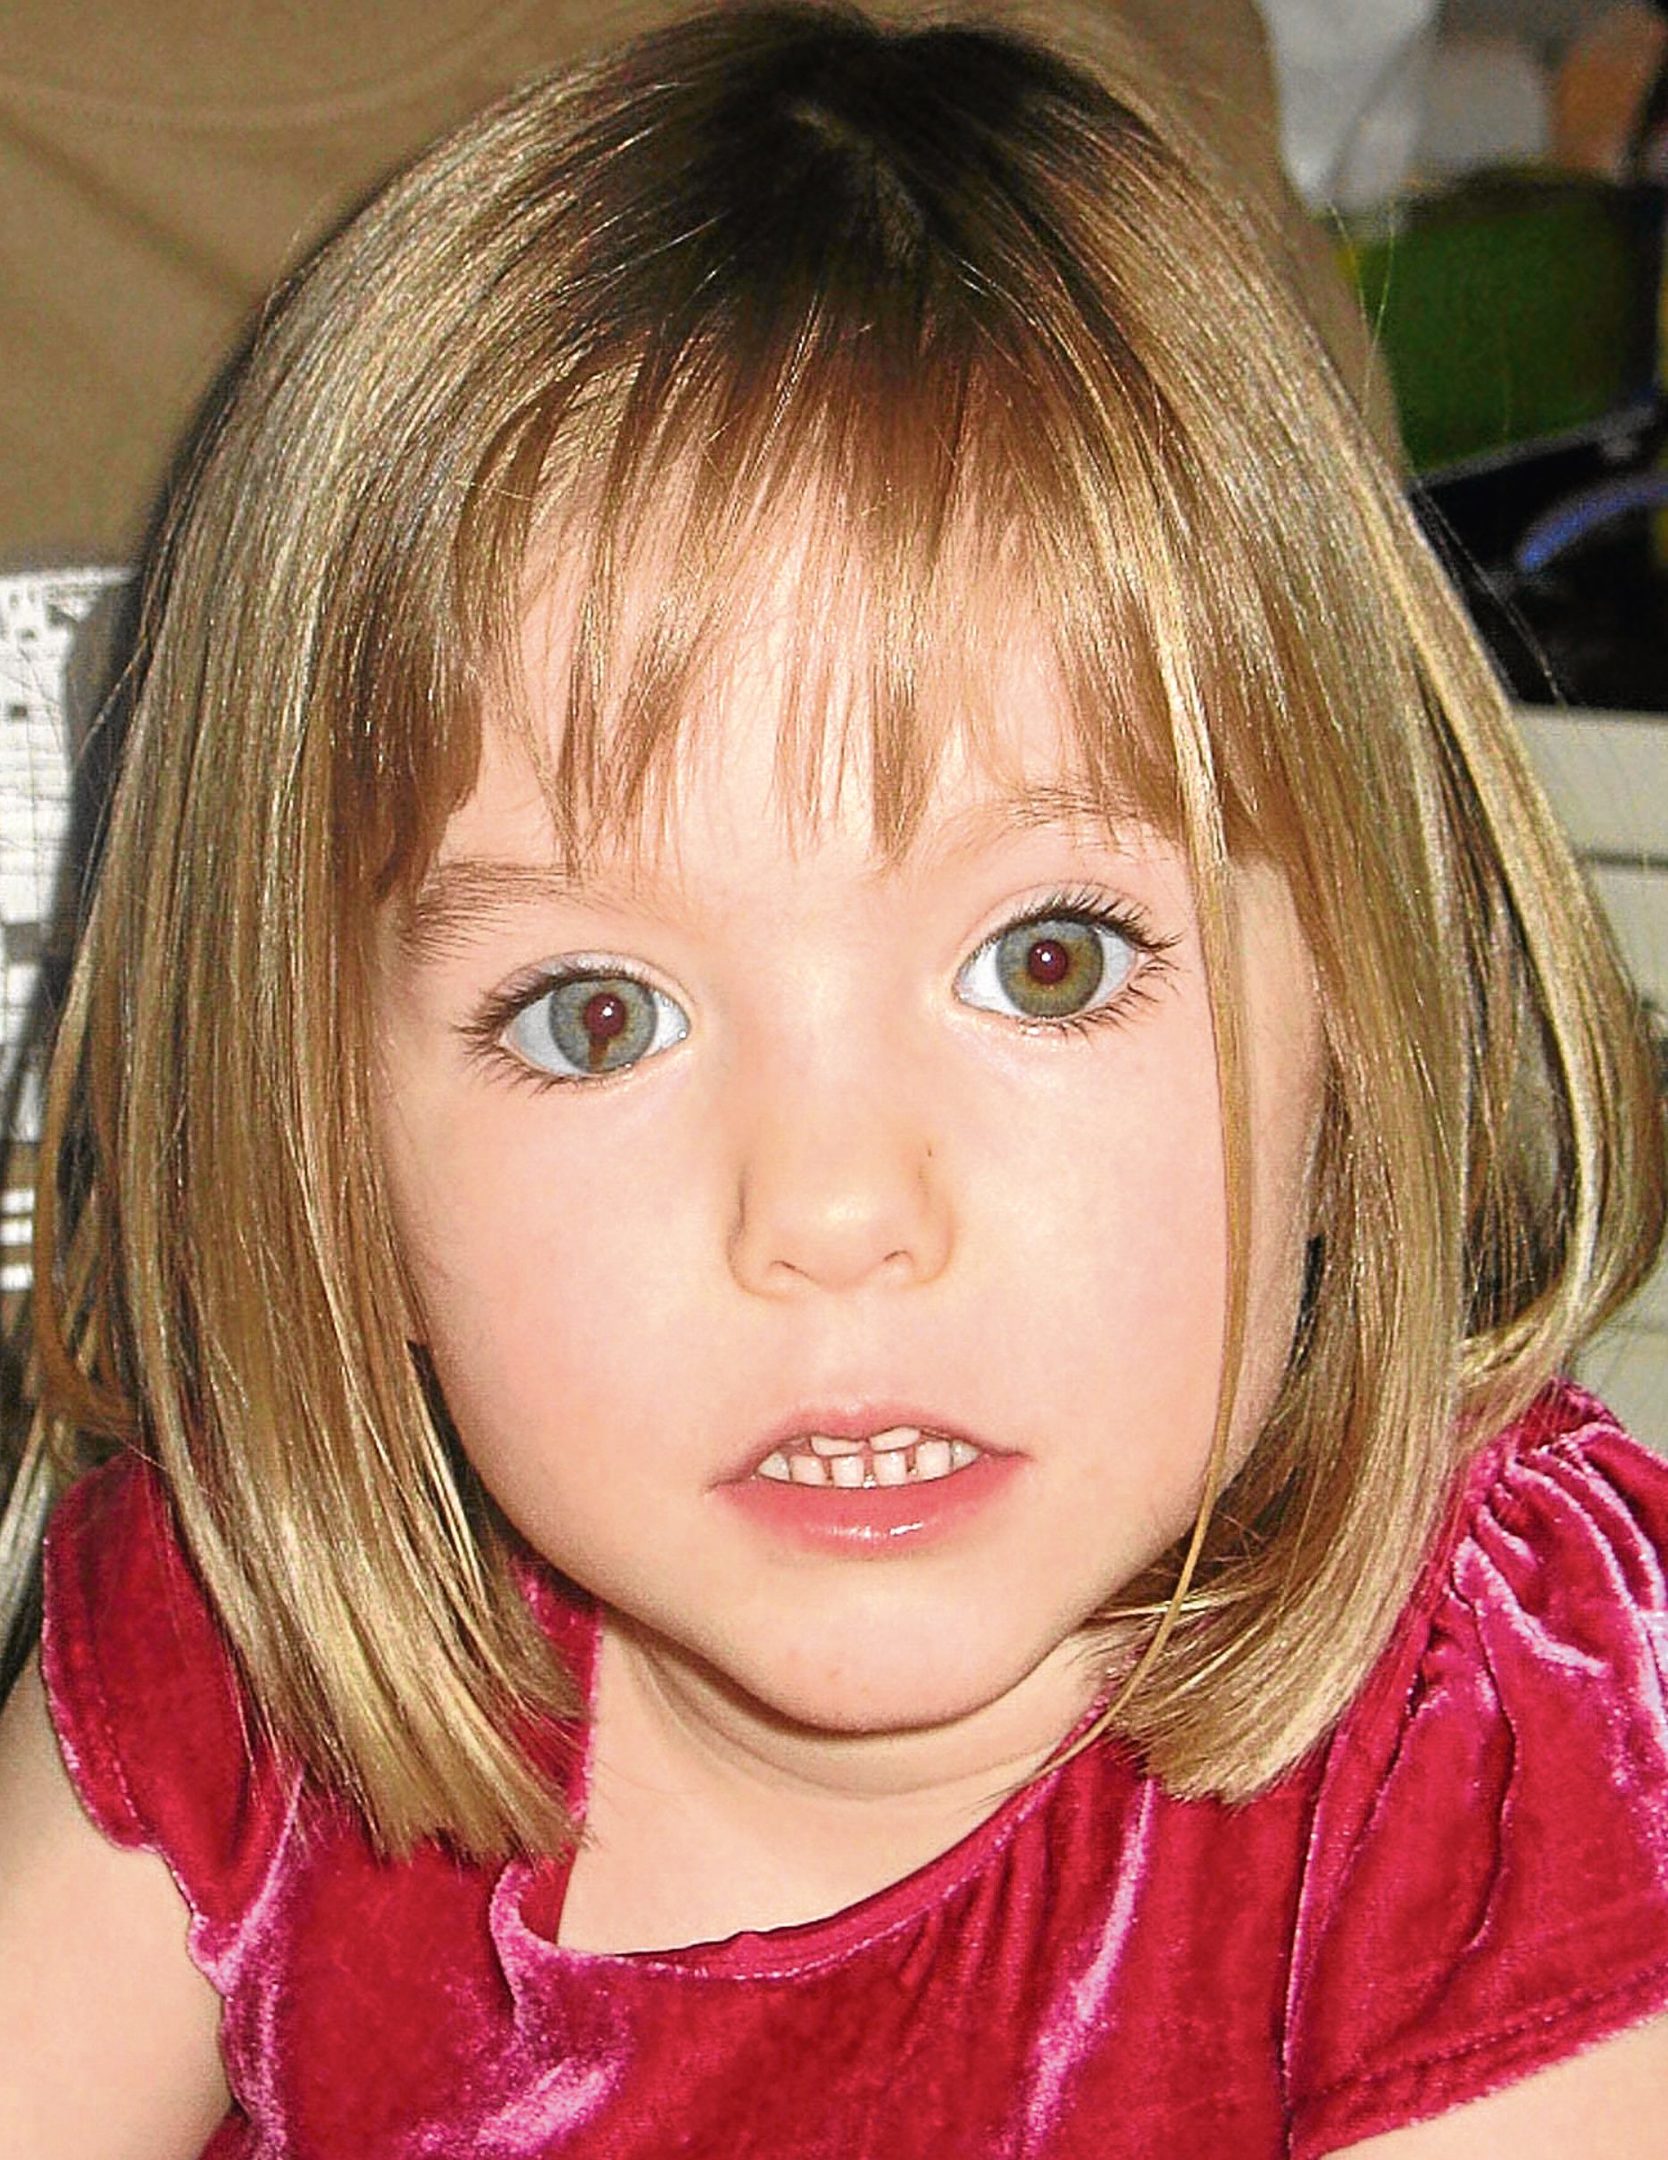 Madeleine McCann, as British detectives working on the McCann case are still pursuing "critical" leads as the 10th anniversary of her disappearance approaches, a Scotland Yard chief has said. (Family Handout/PA Wire)